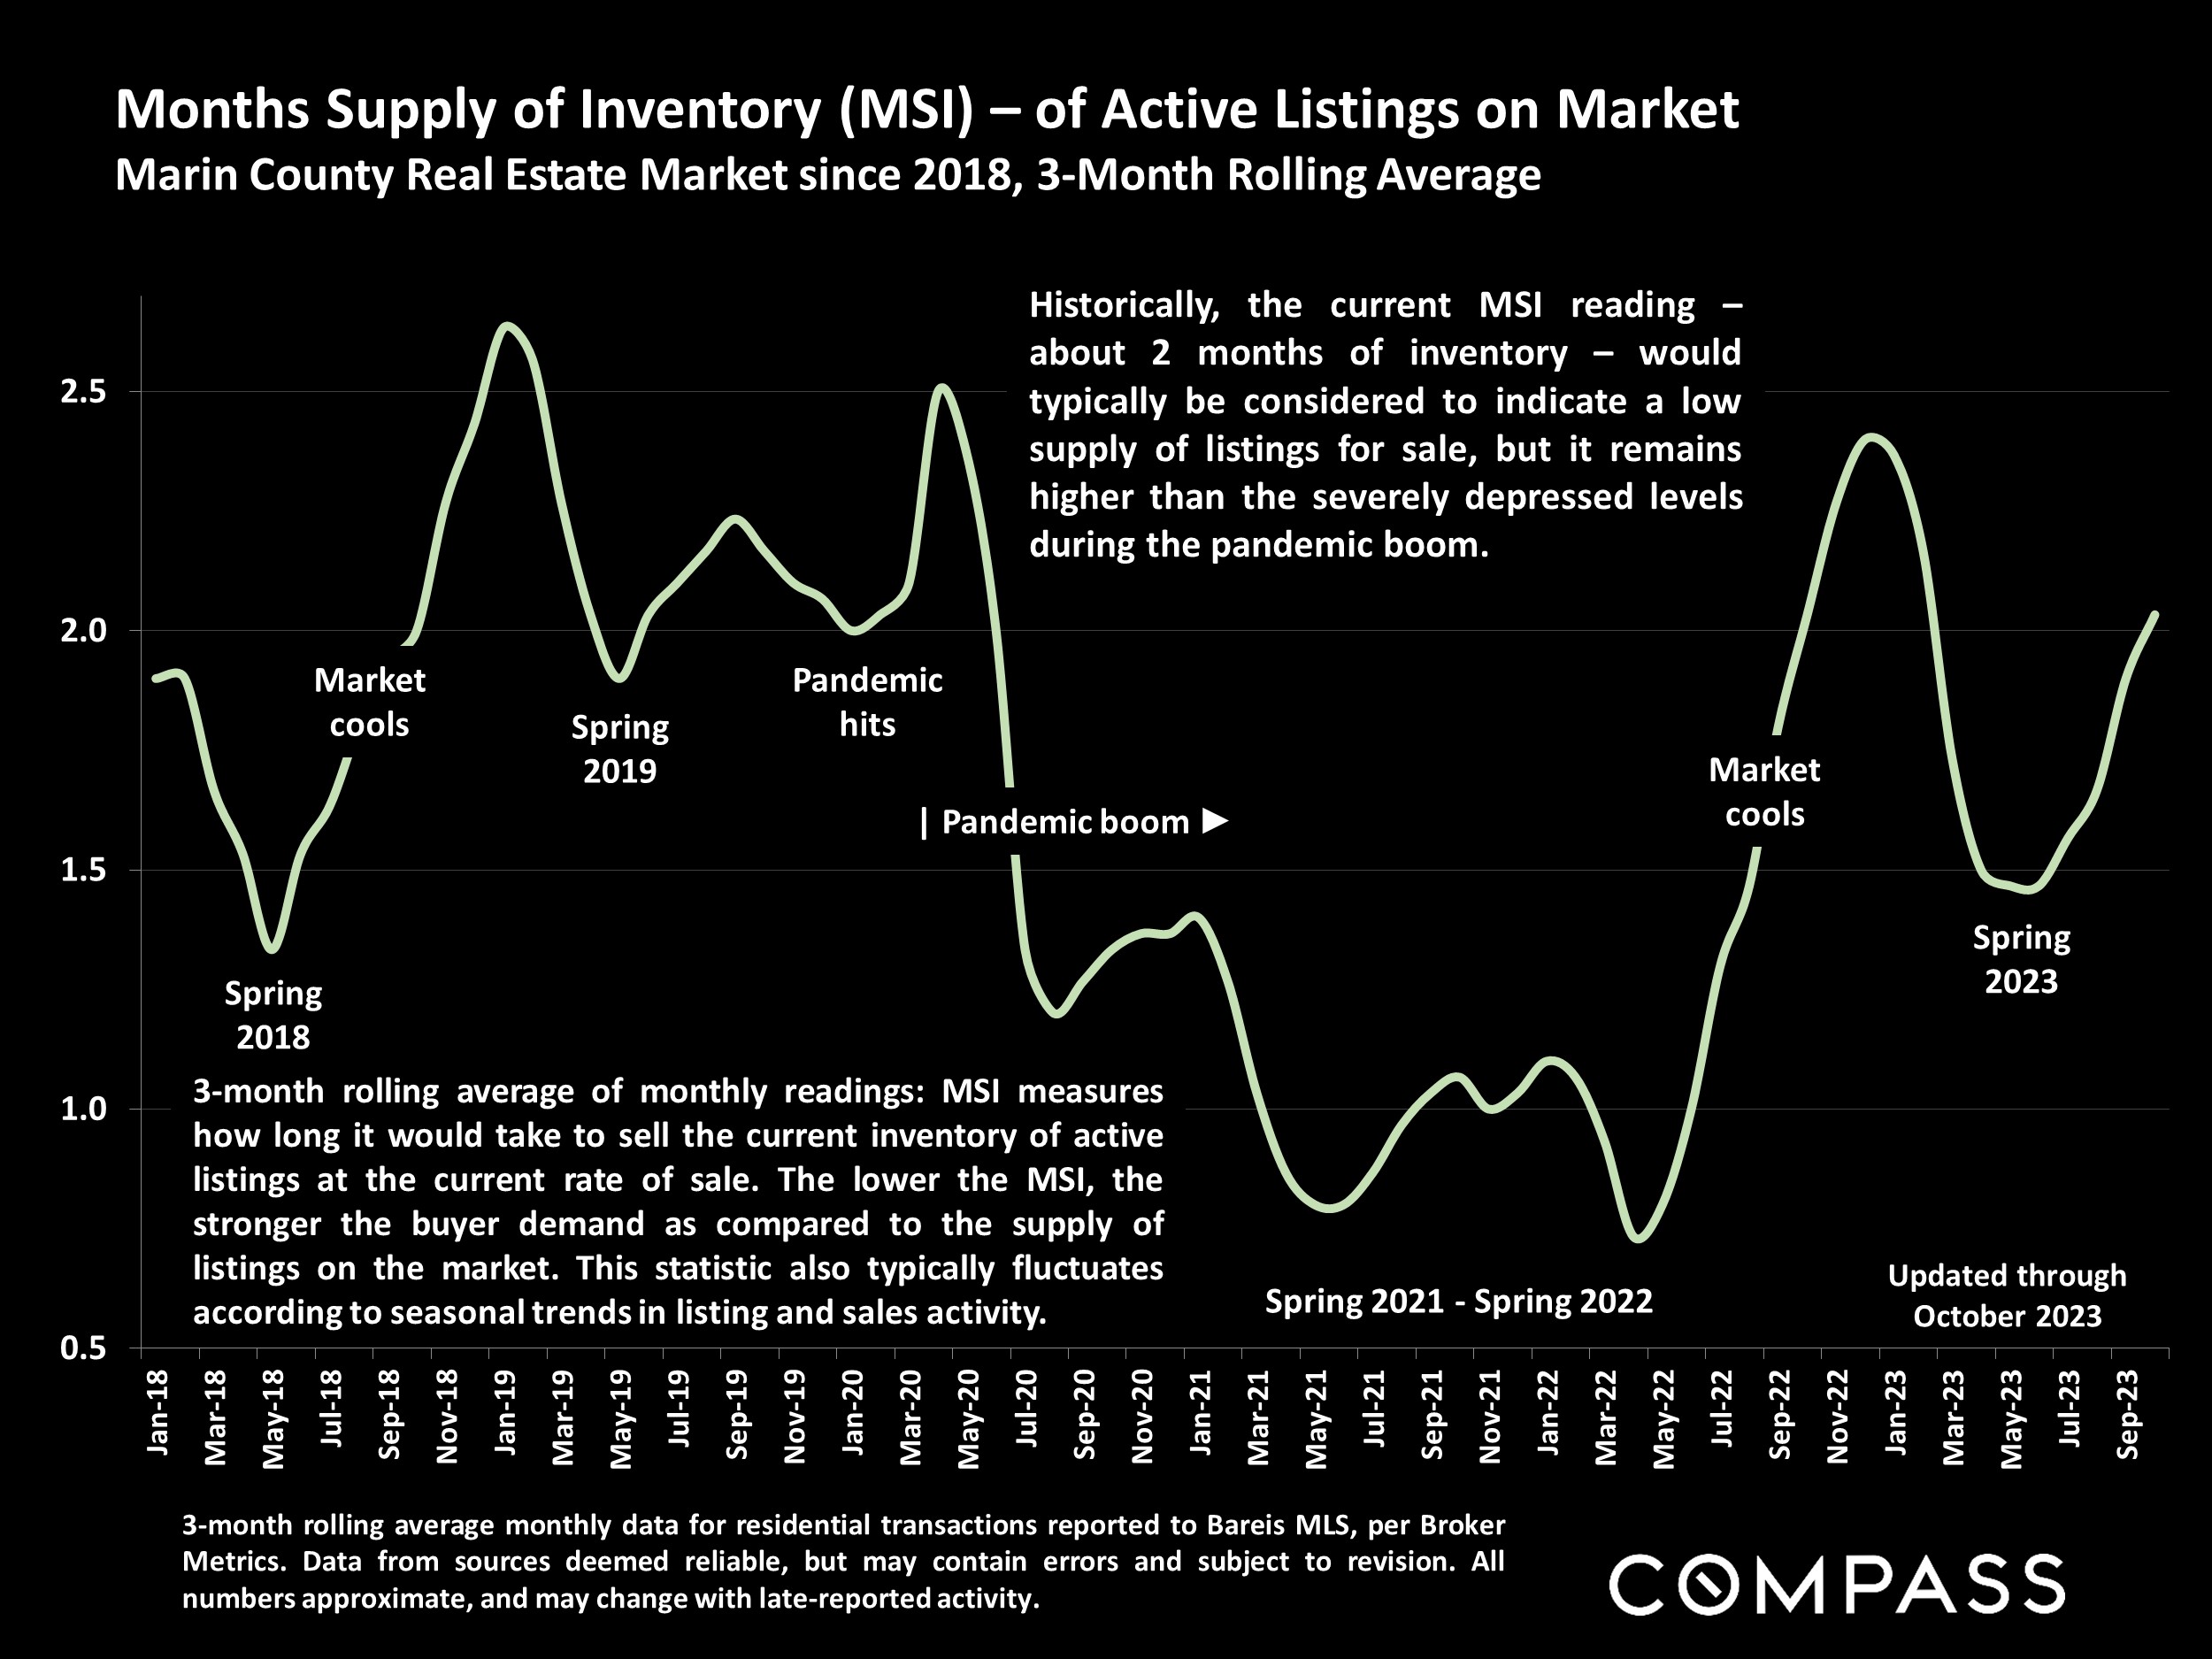 Months Supply of Inventory (MSI) - of Active Listings on Market Marin County Real Estate Market since 2018, 3-Month Rolling Average